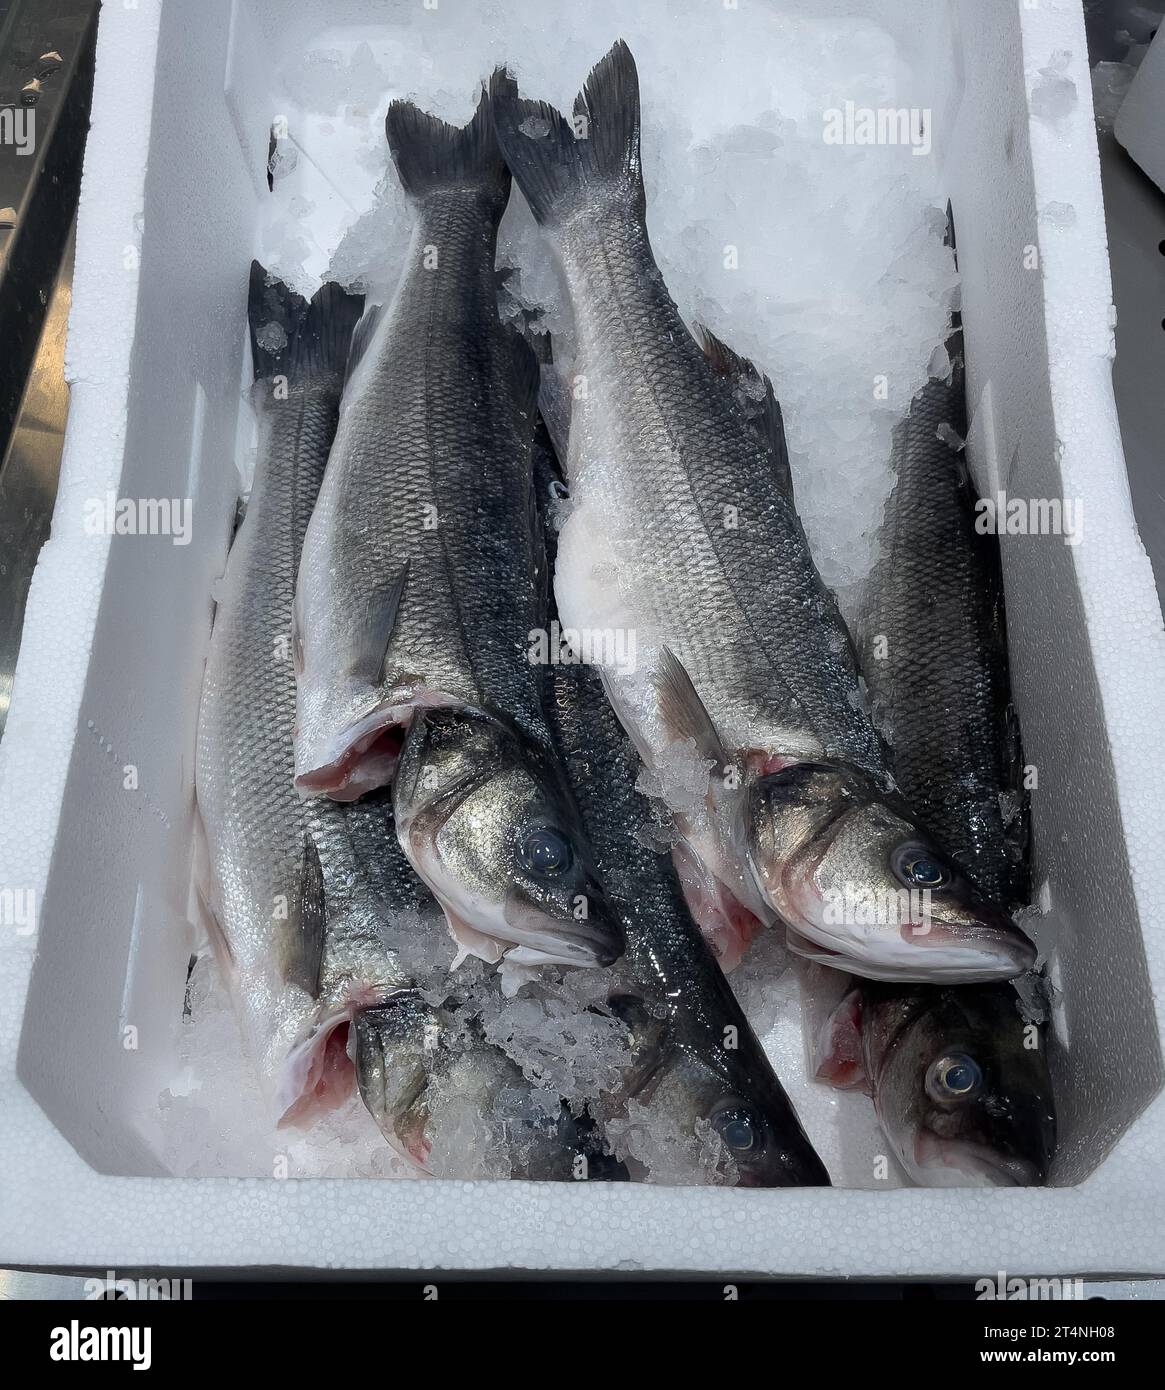 Display of fishing caught whole fish fresh fish six pieces temperate basses (Moronidae) Loup de Mer Branzino Spinola on ice in refrigerated counter Stock Photo